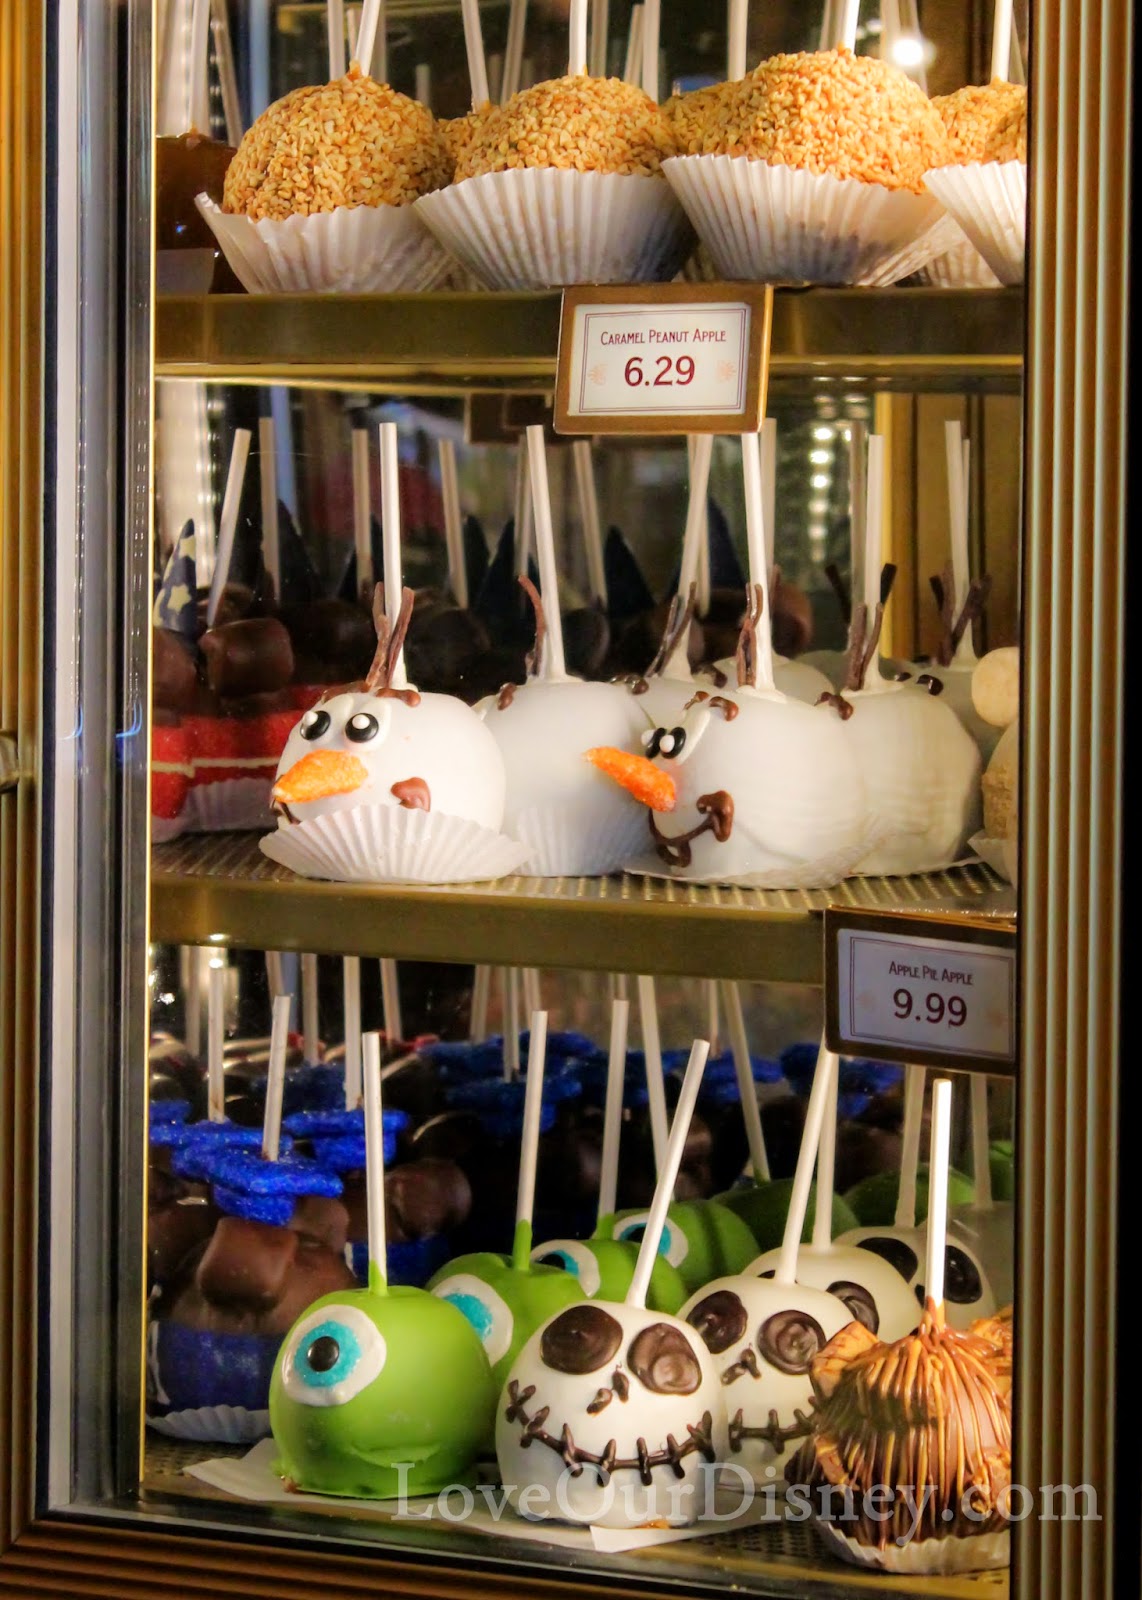 Check out these Disney themed candied apples at Disneyland's Candy Palace. LoveOurDisney.com